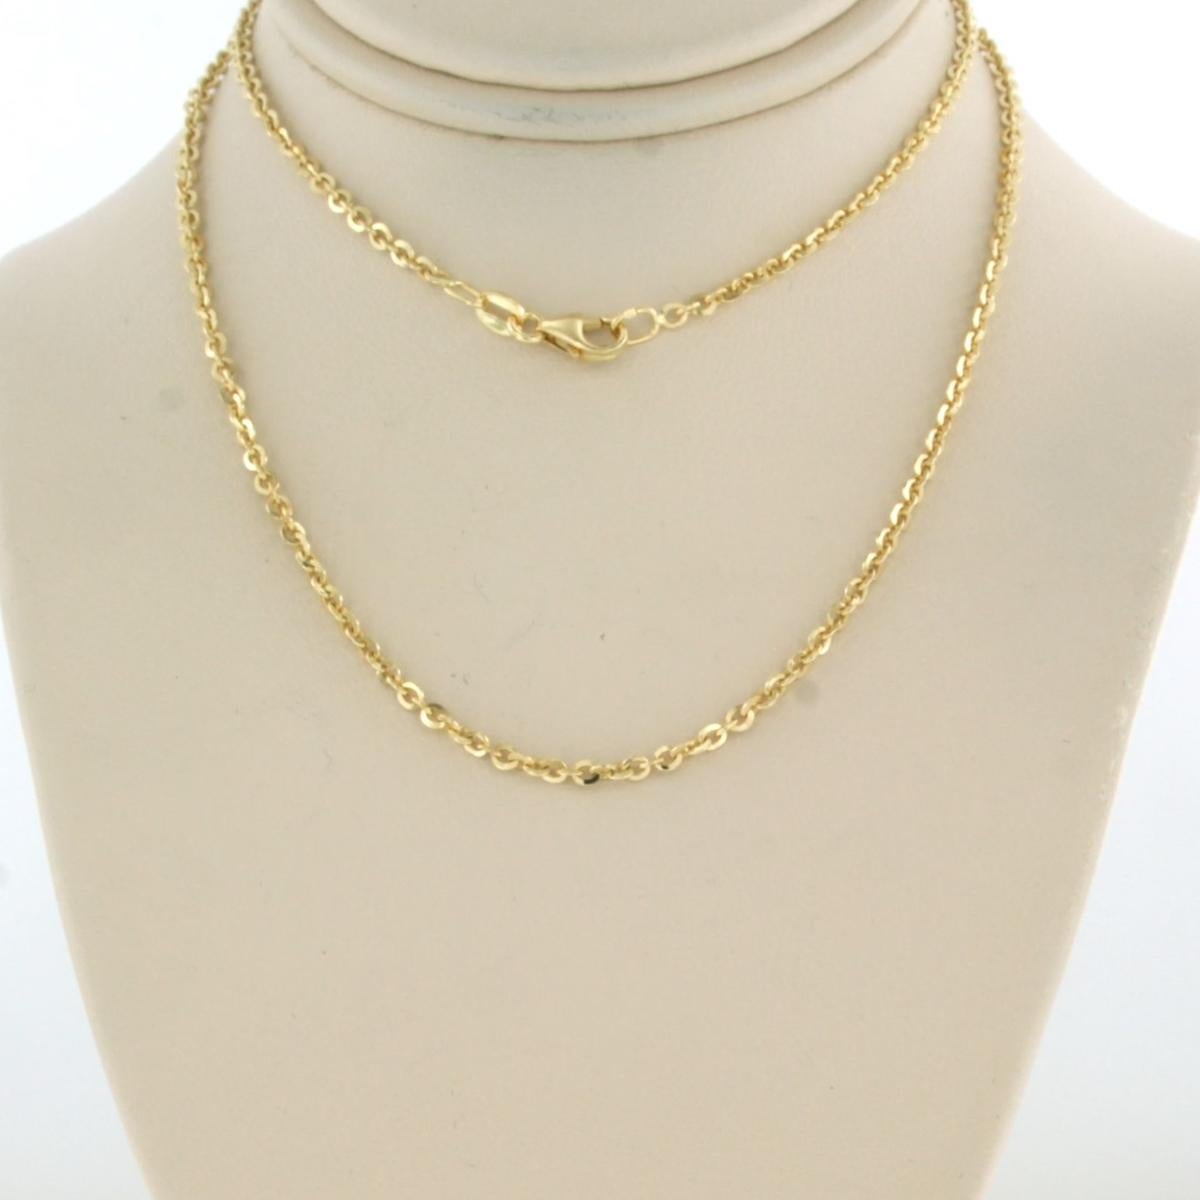 18k yellow gold necklace - length 40 cm

detailed description:

the chain is 40 cm long and 1.9 mm wide

weight 4.3 grams

the necklace is in good condition

hallmark present, guaranteed 18k gold
B15706